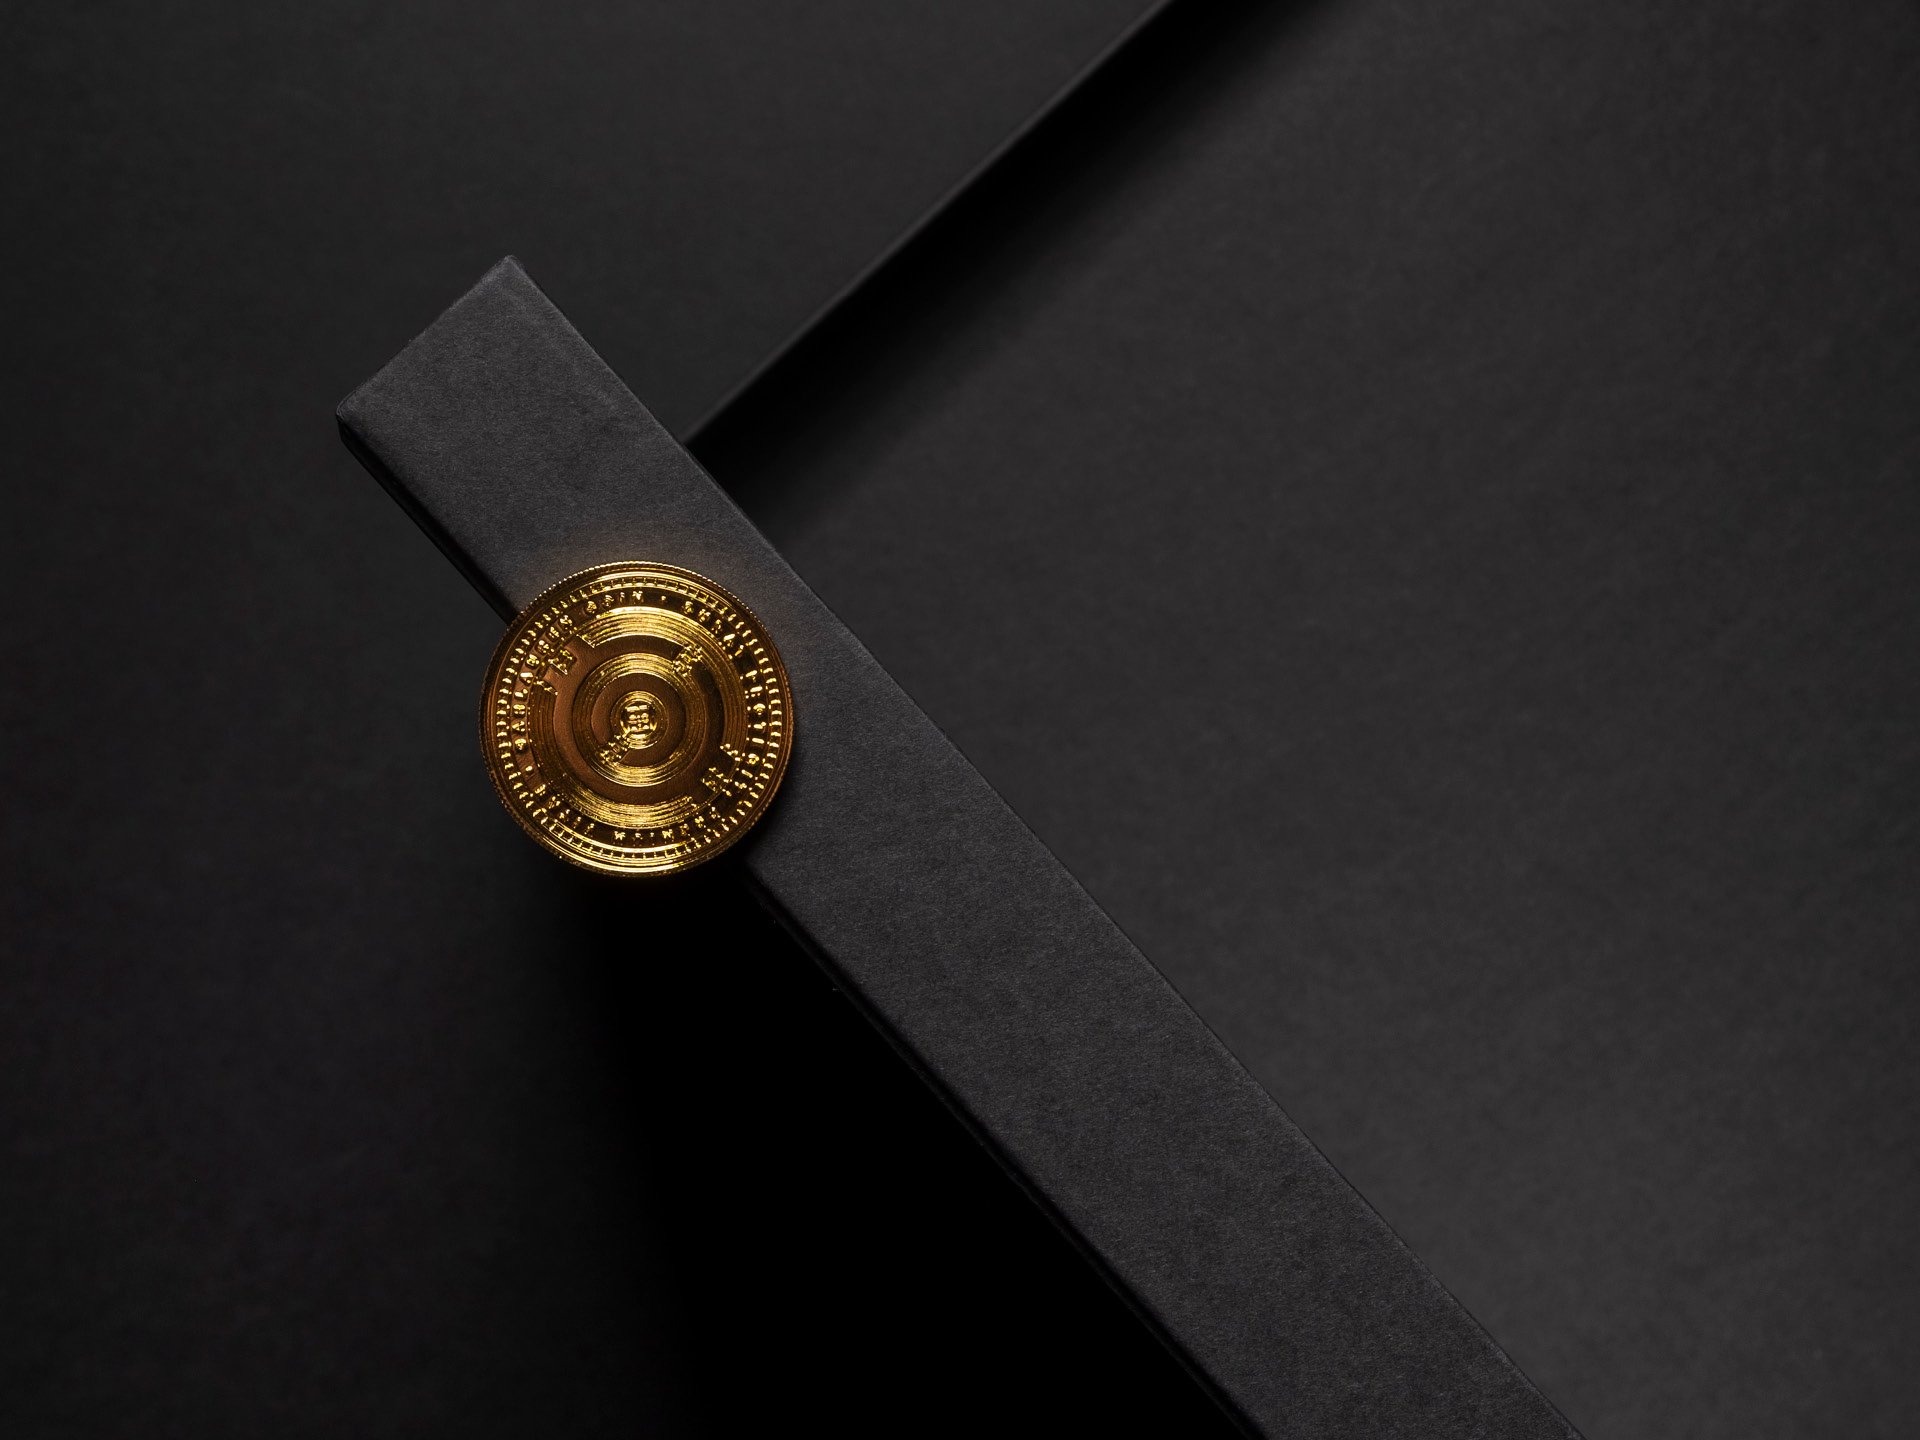 A golden coin positioned on the edge of a black box